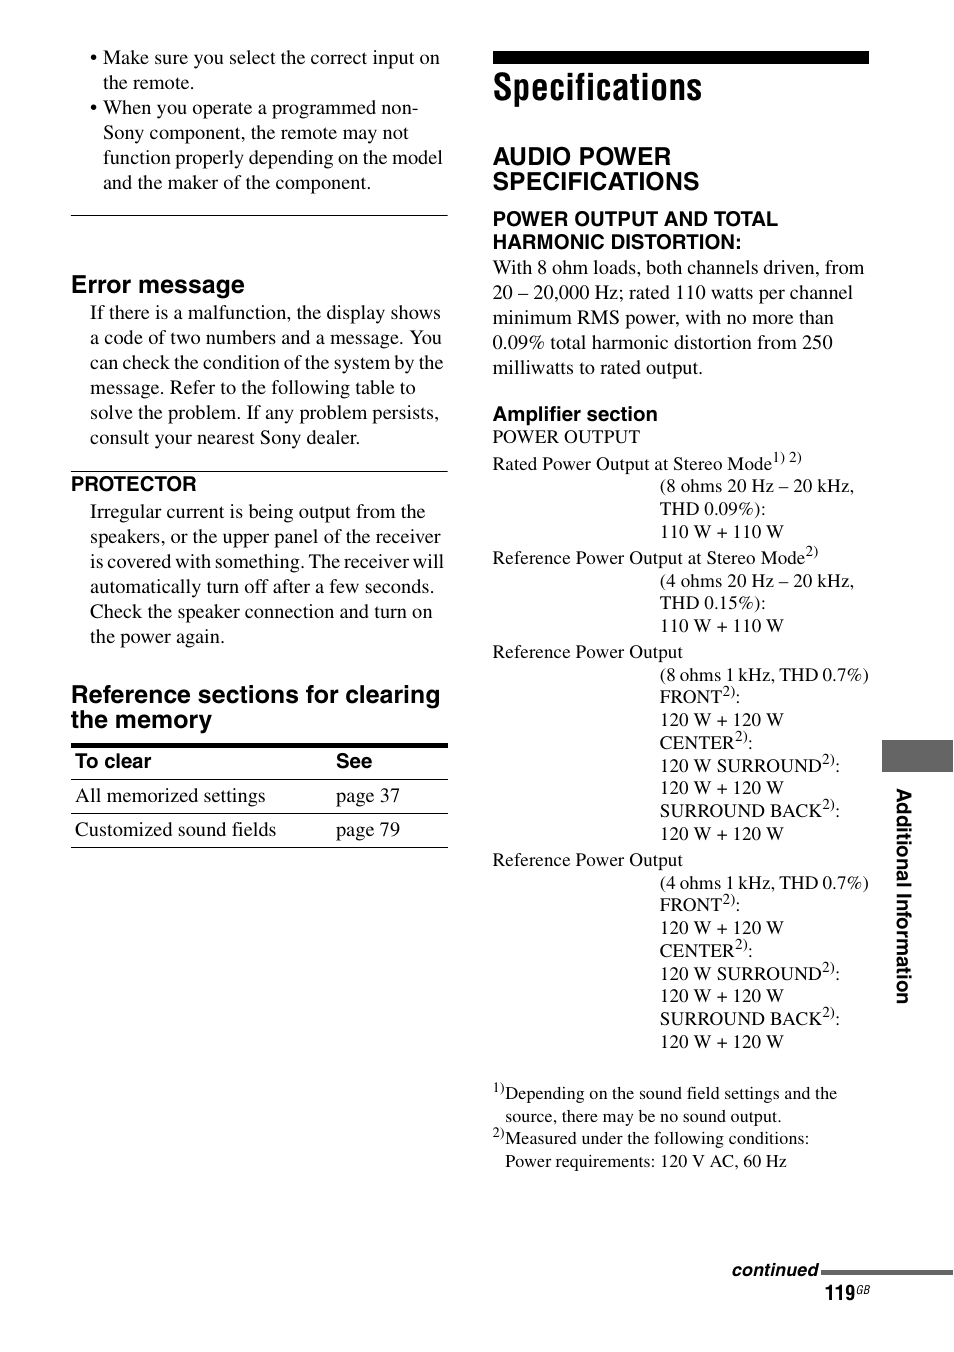 Specifications, Error message, Audio power specifications | Sony STR-DG1000 User Manual | Page 119 / 123